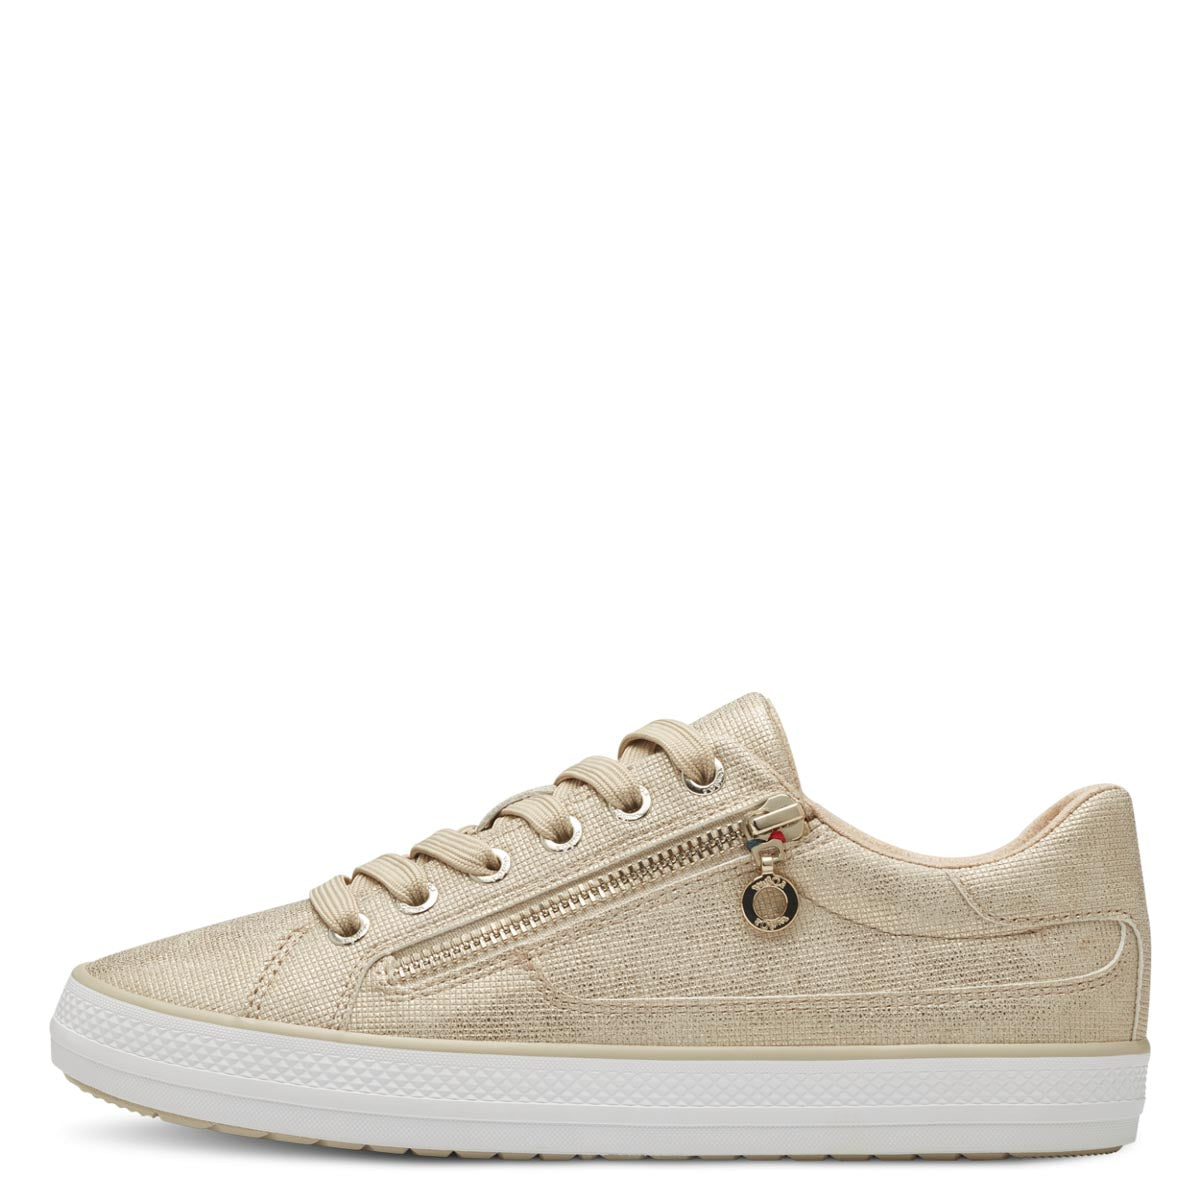 Front view of S.Oliver Gold-Taupe Runner Sneakers, highlighting the rounded toe and unique laces.